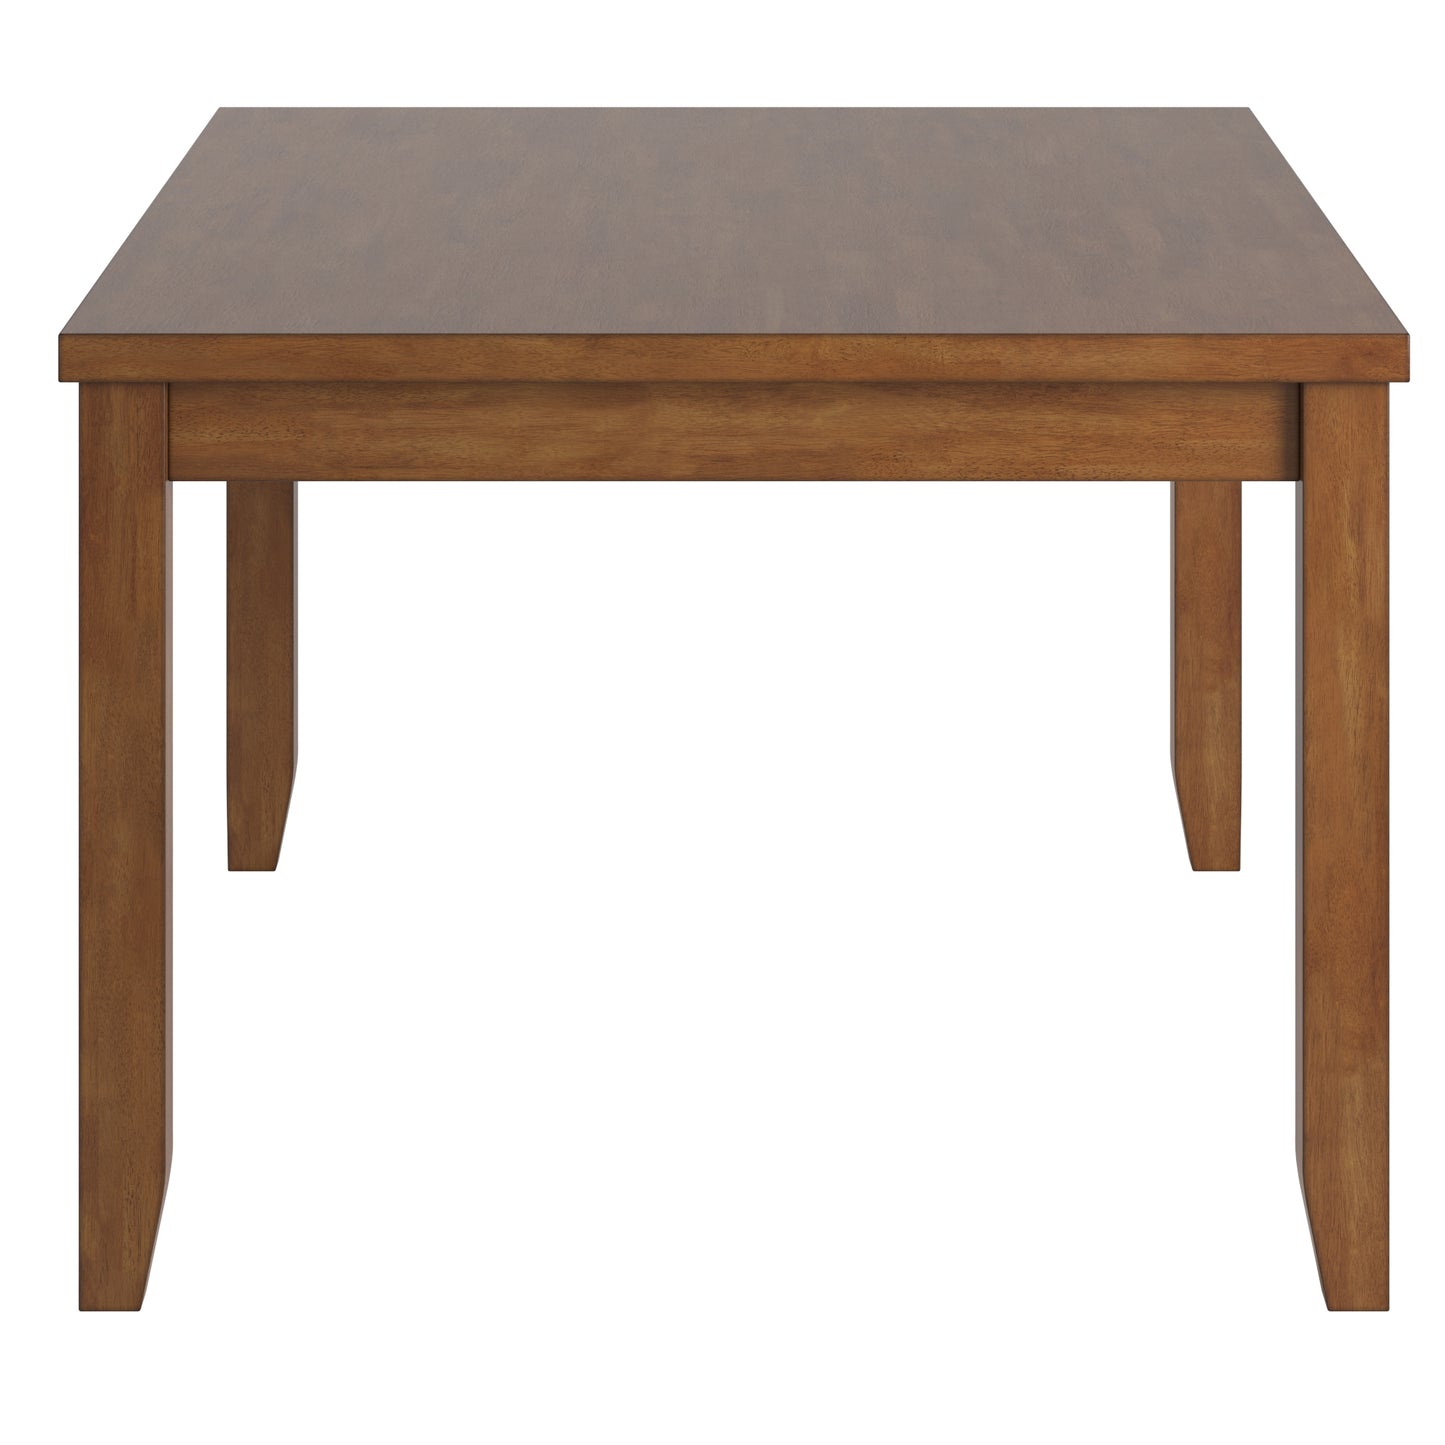 Solid Wood Rectangular Dining Table with Two Drawers - Oak Finish